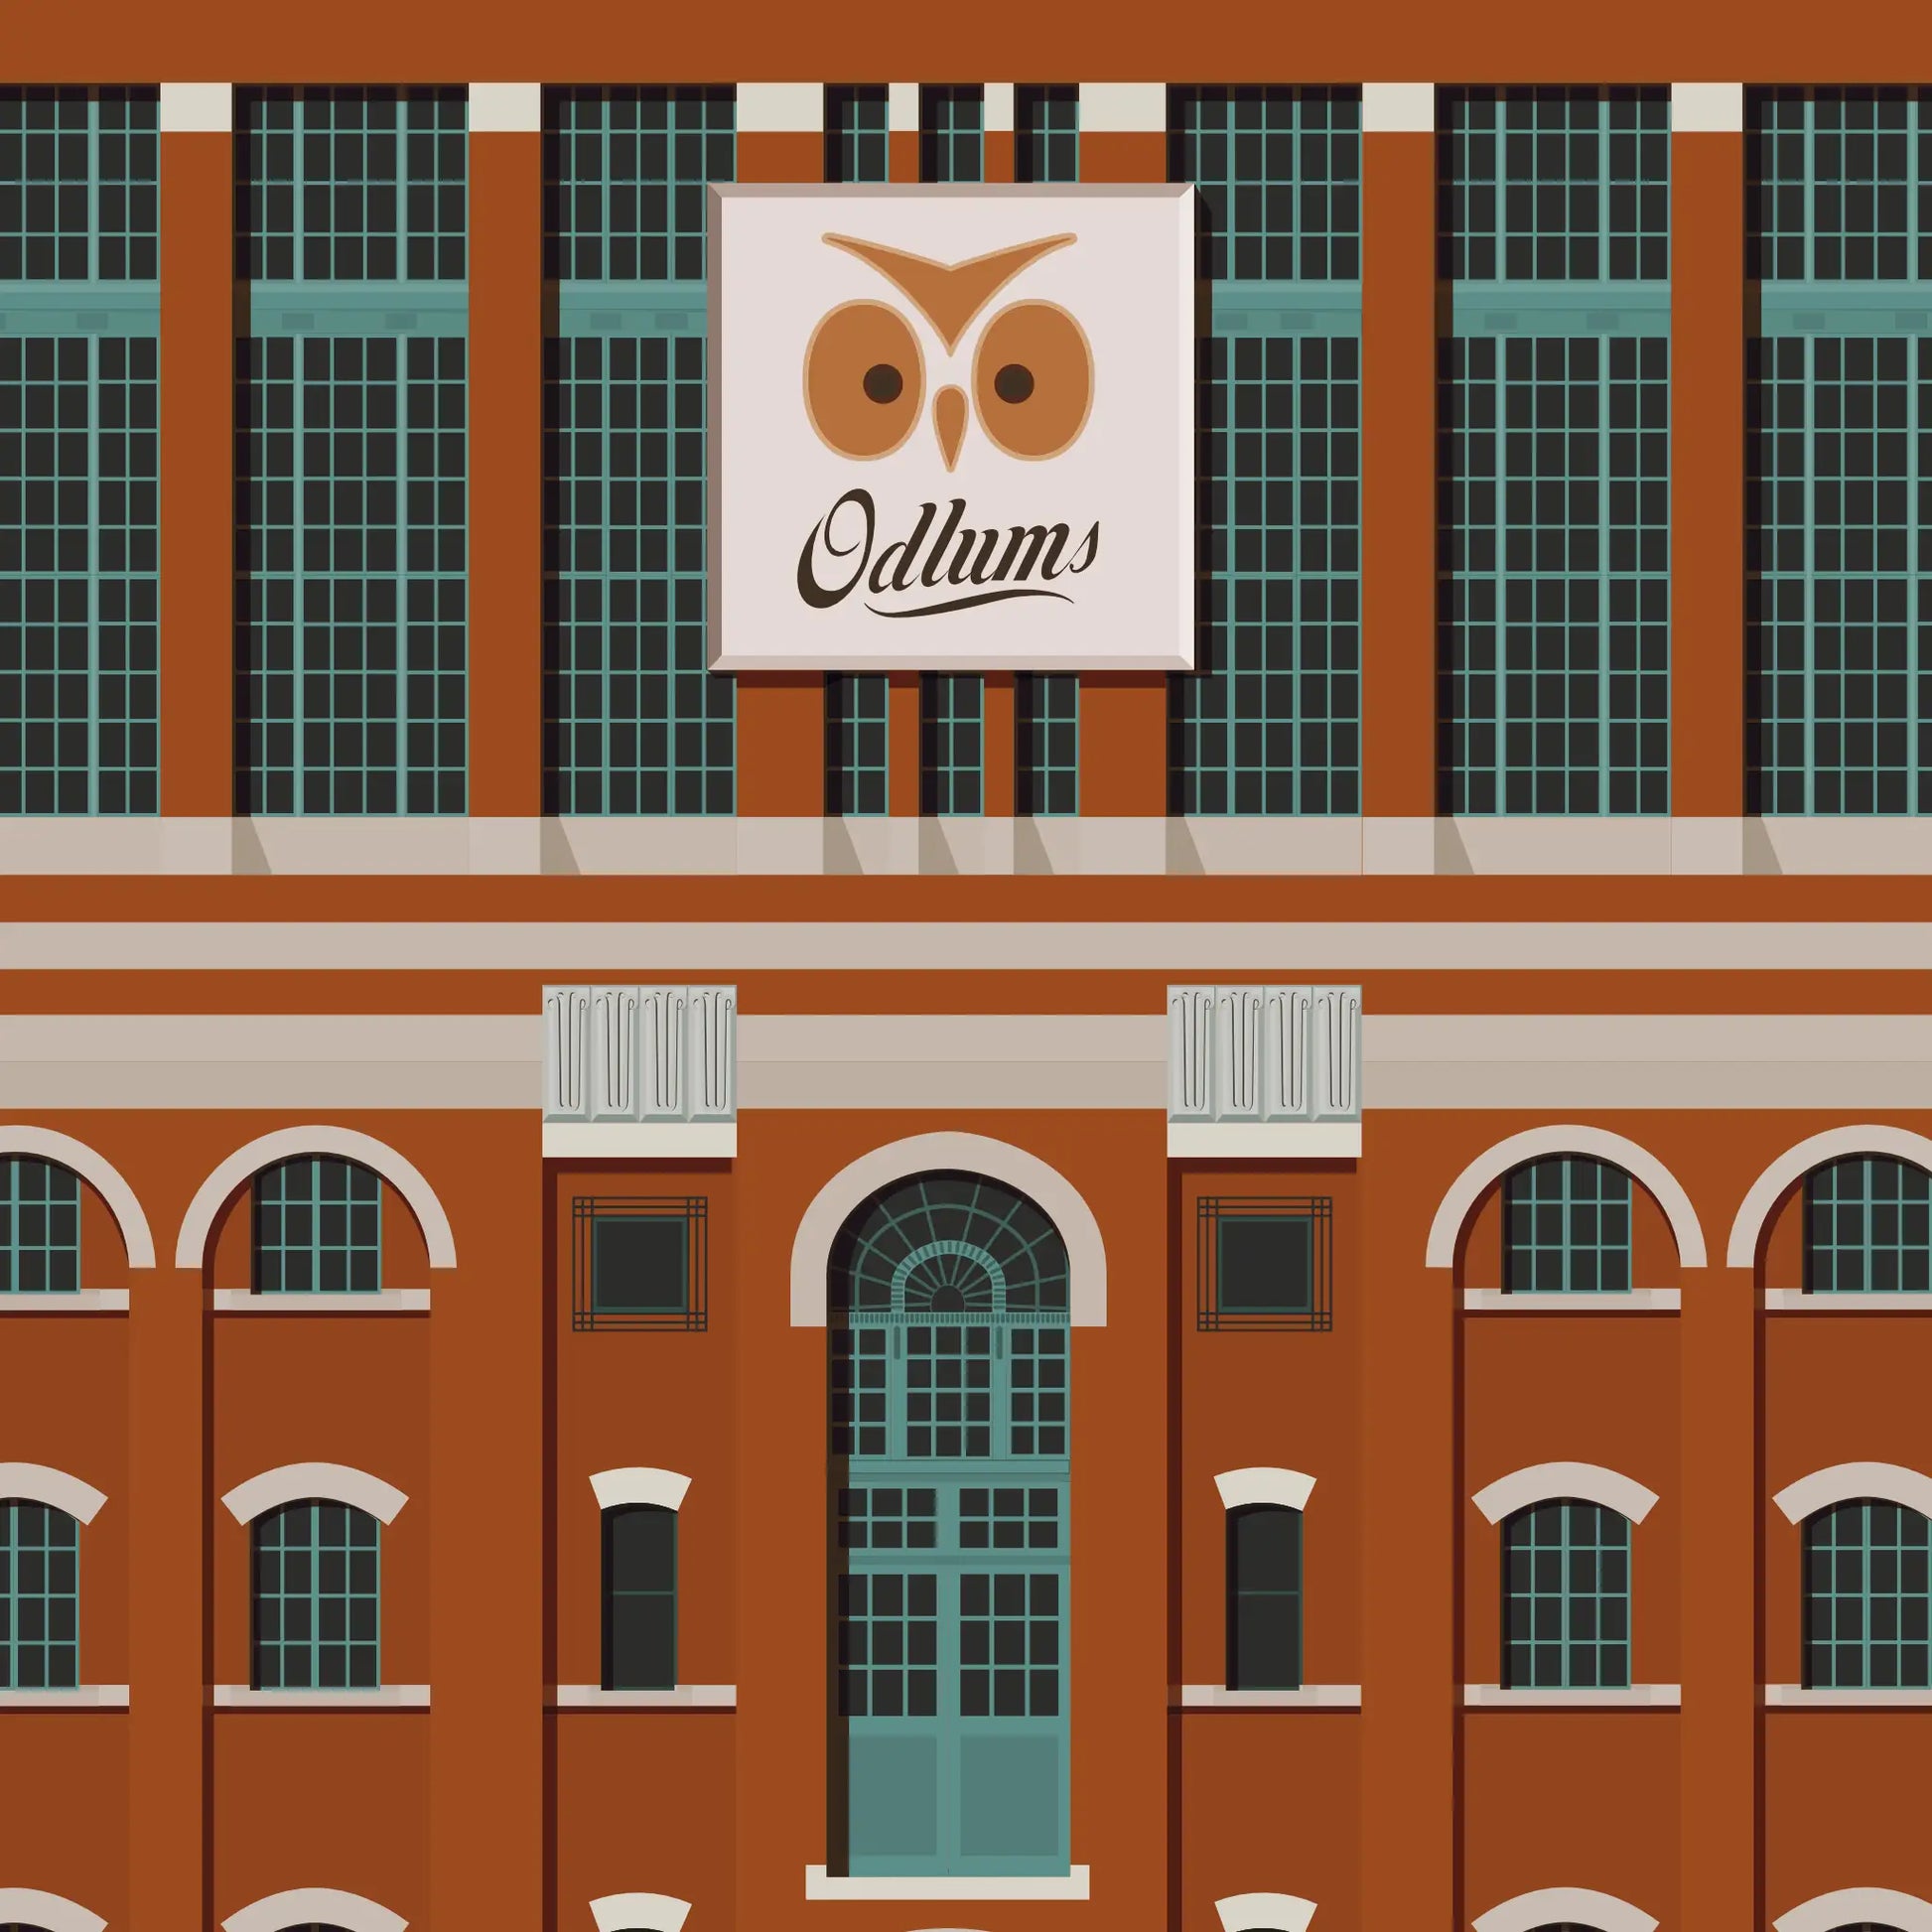 Illustrated detail of the Odlums Flour Mill in Cork, Ireland.